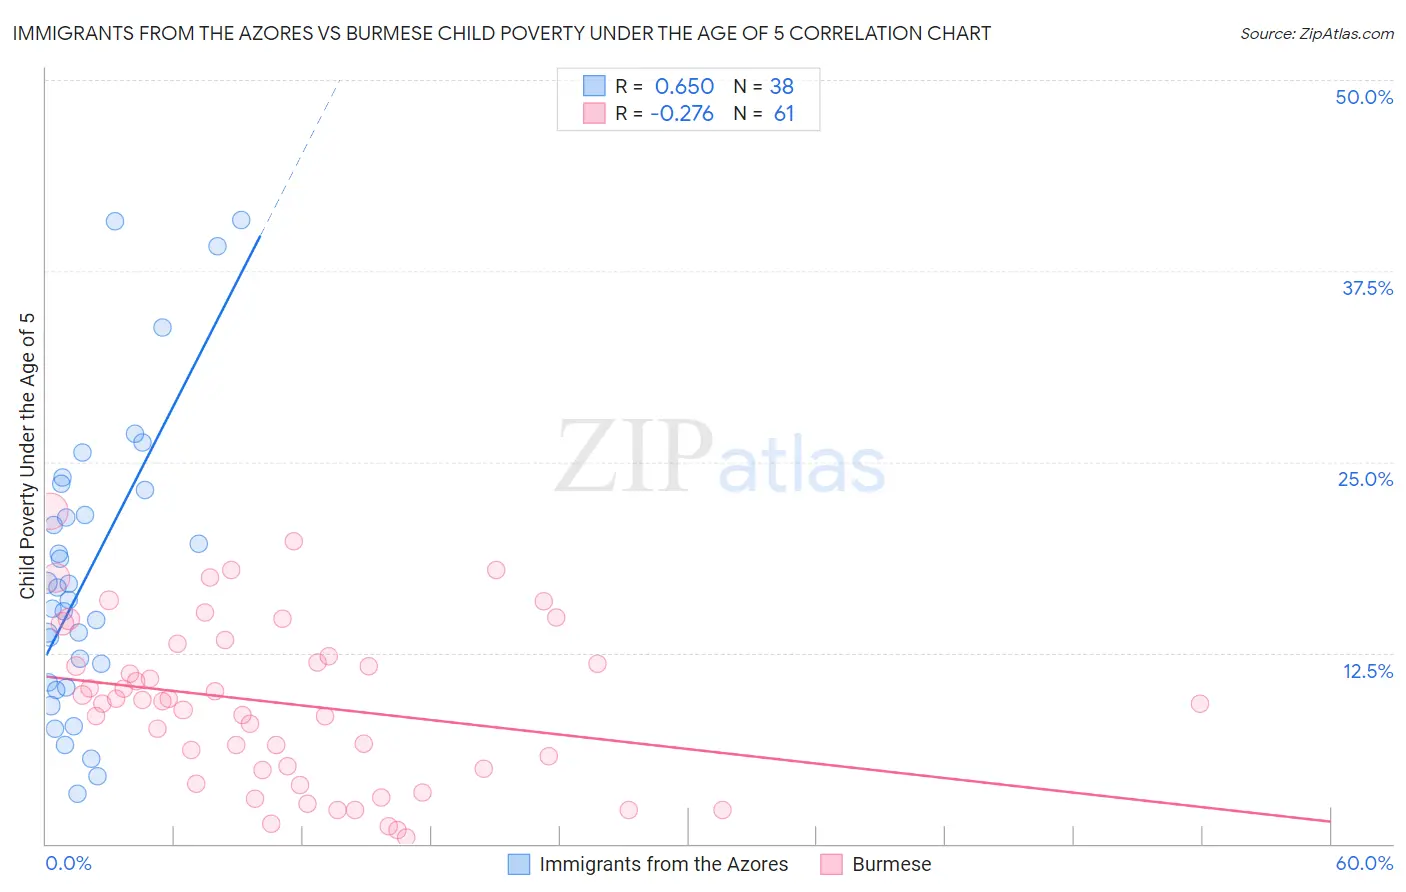 Immigrants from the Azores vs Burmese Child Poverty Under the Age of 5